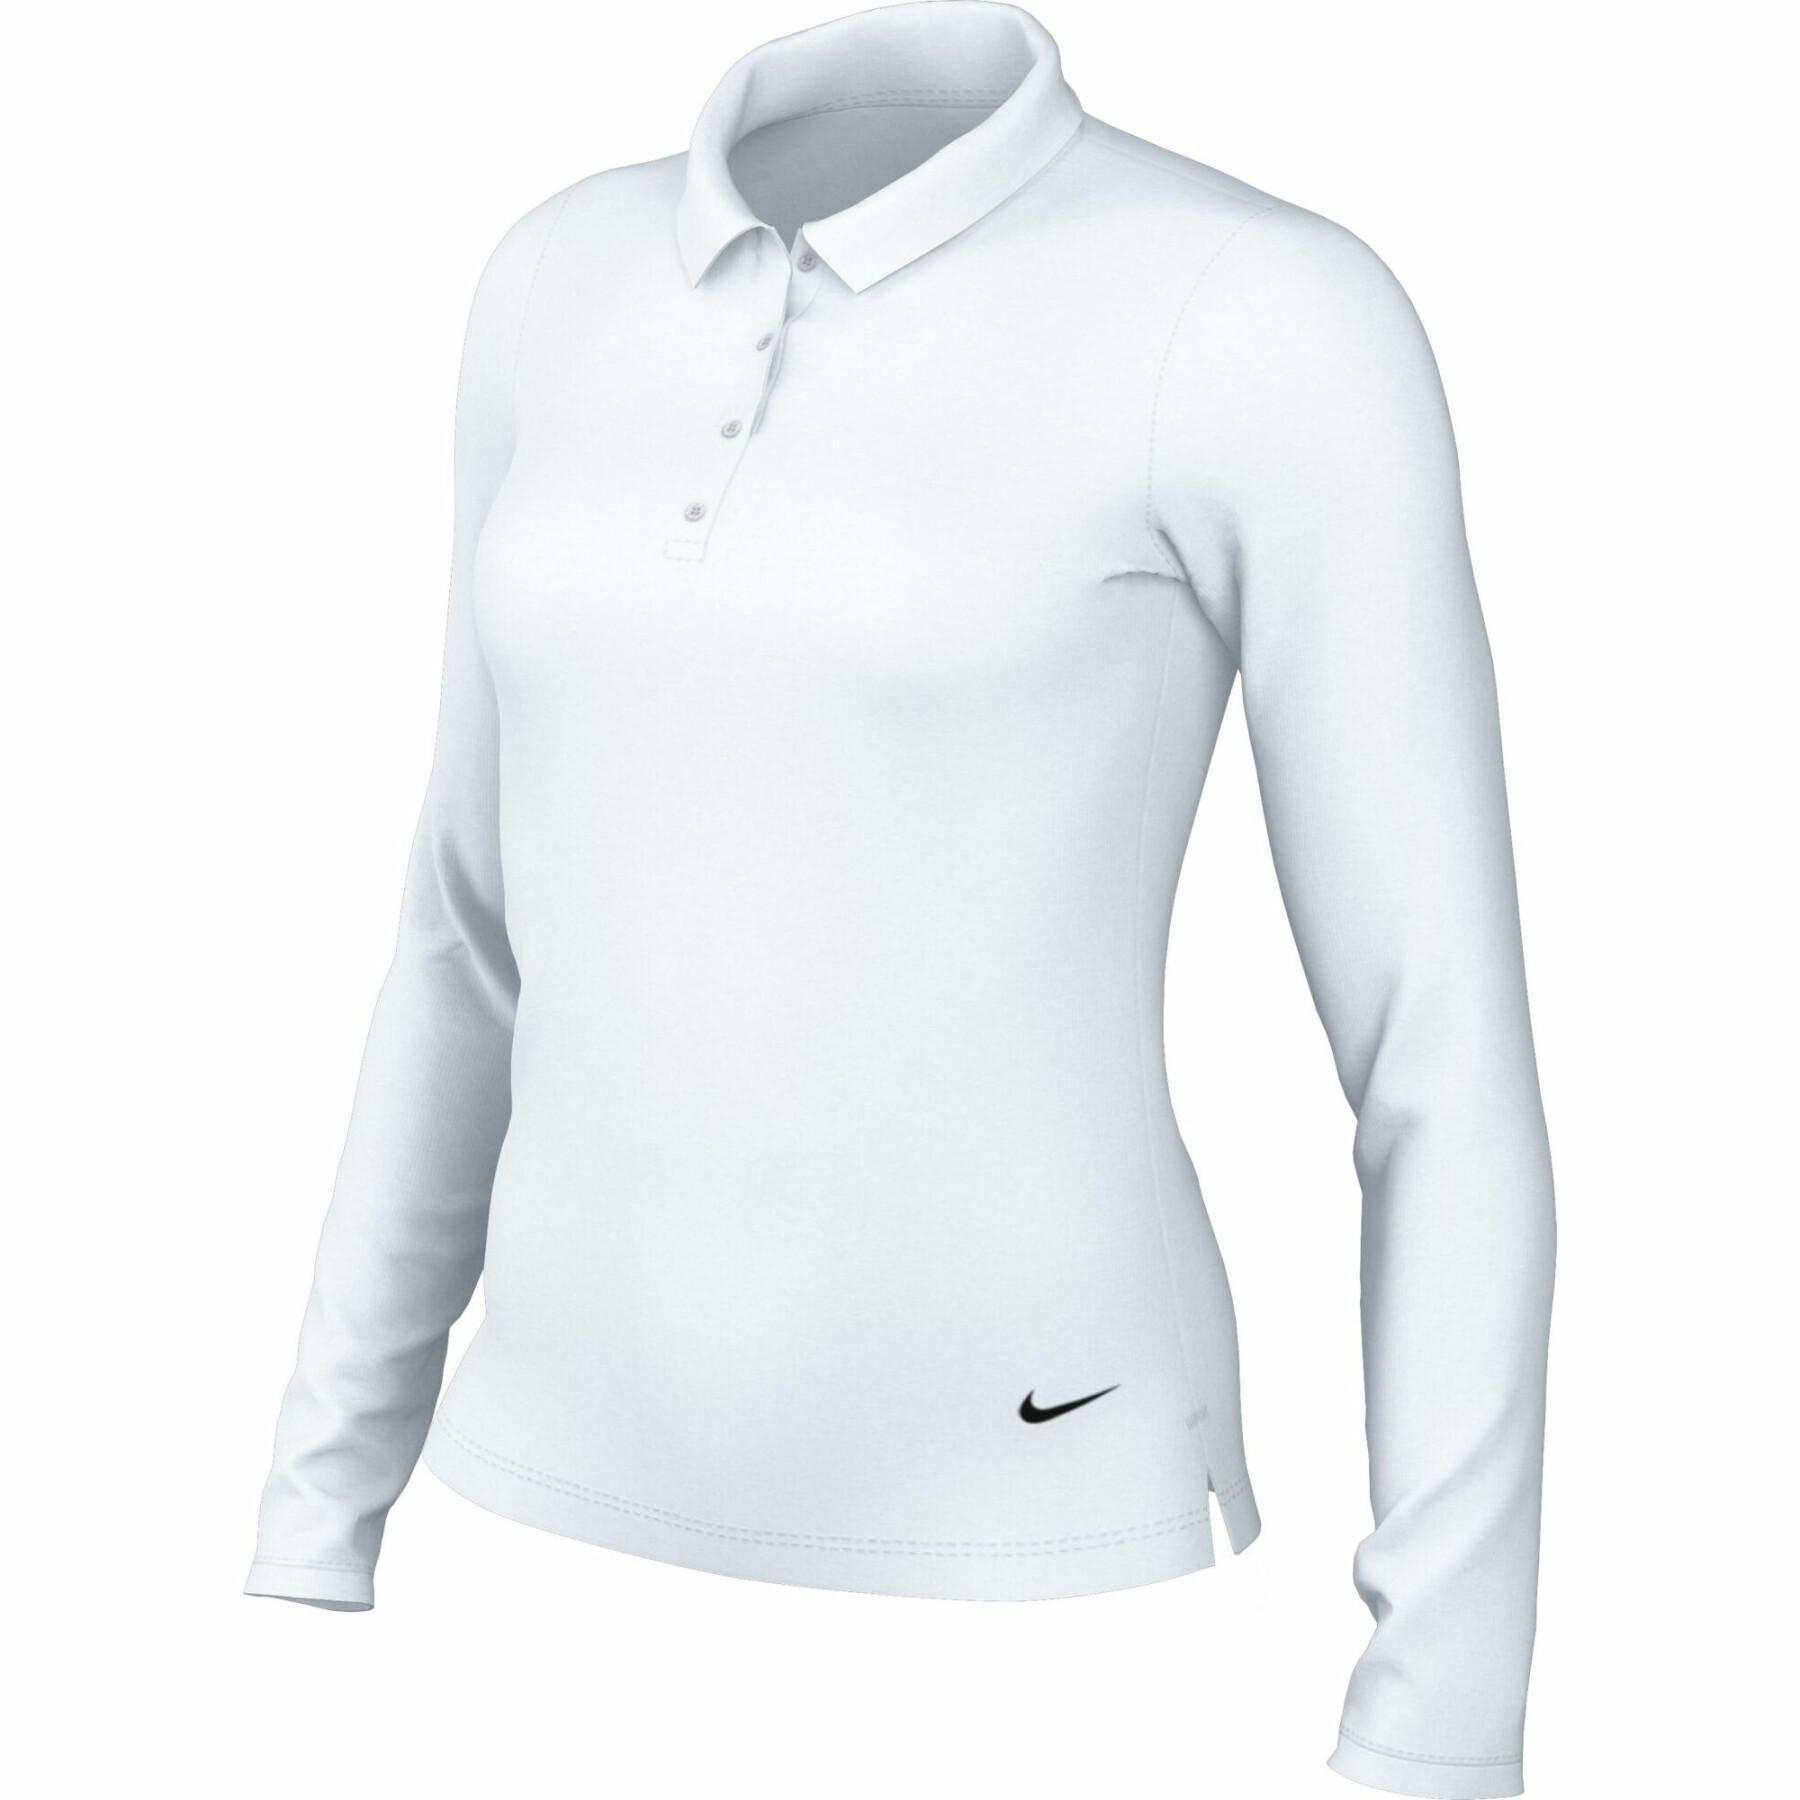 Polo manches femme Nike Victory - Vêtements